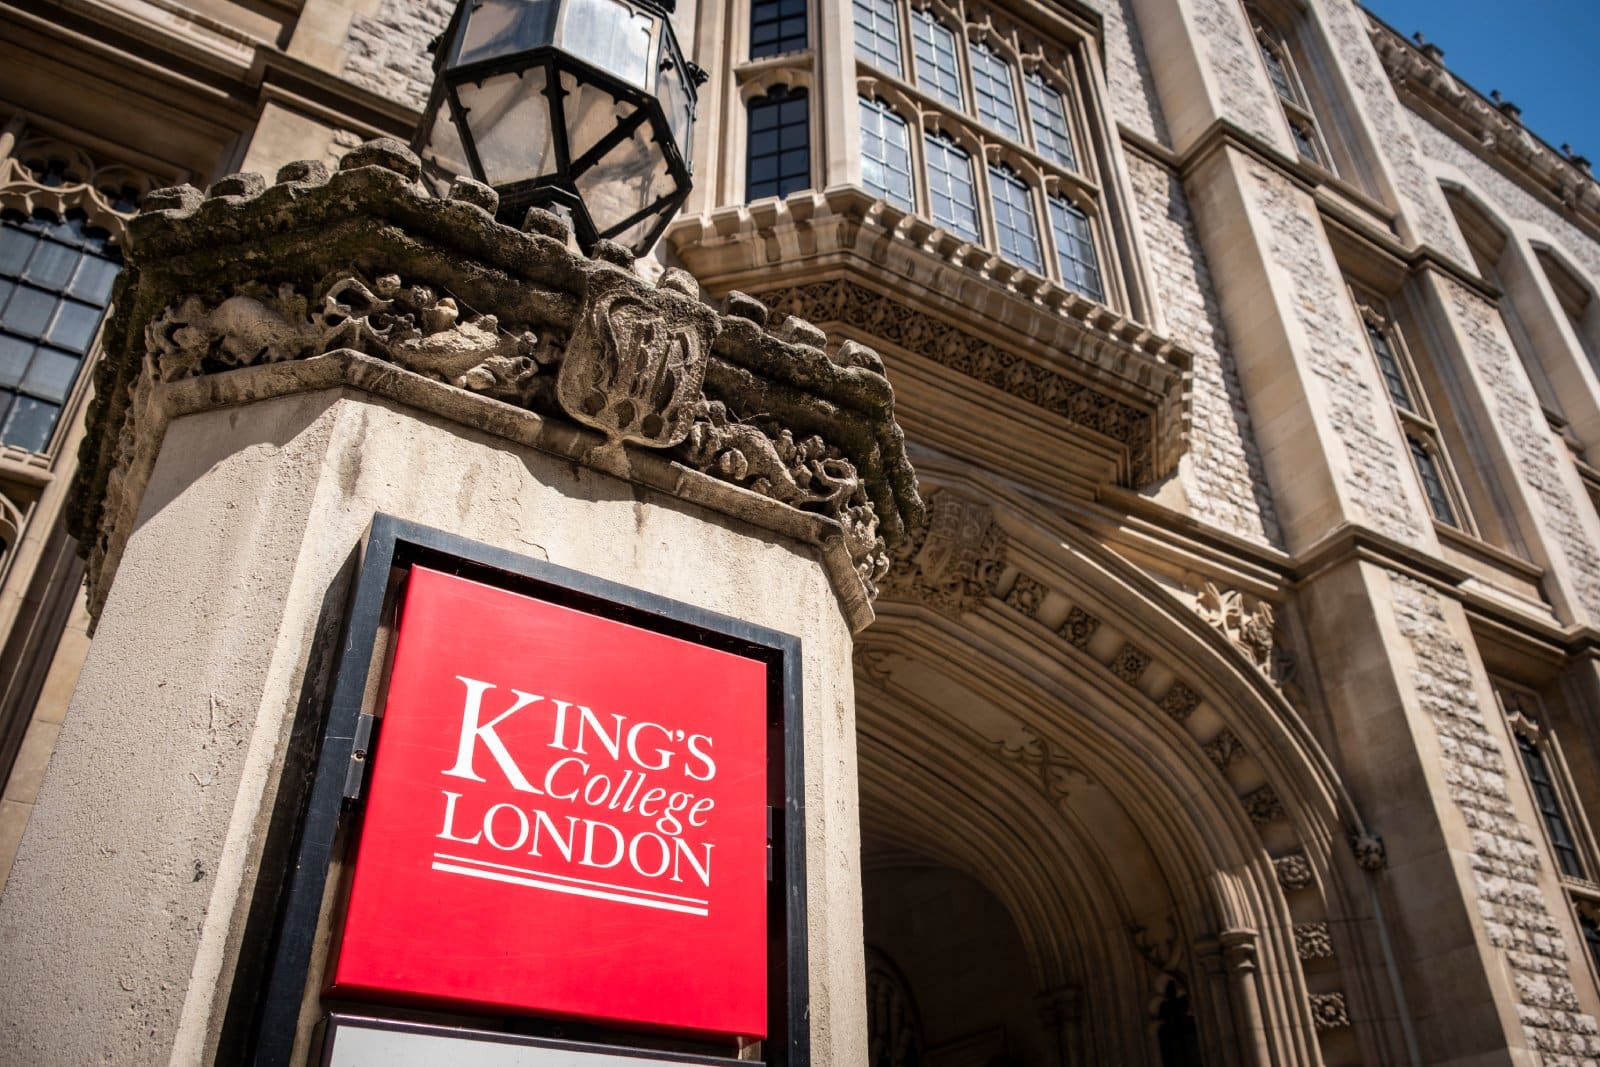 Image Credit: Shutterstock / William Barton <p>At the vanguard of health sciences, King’s leverages its prime location for cutting-edge medical research and education.</p>